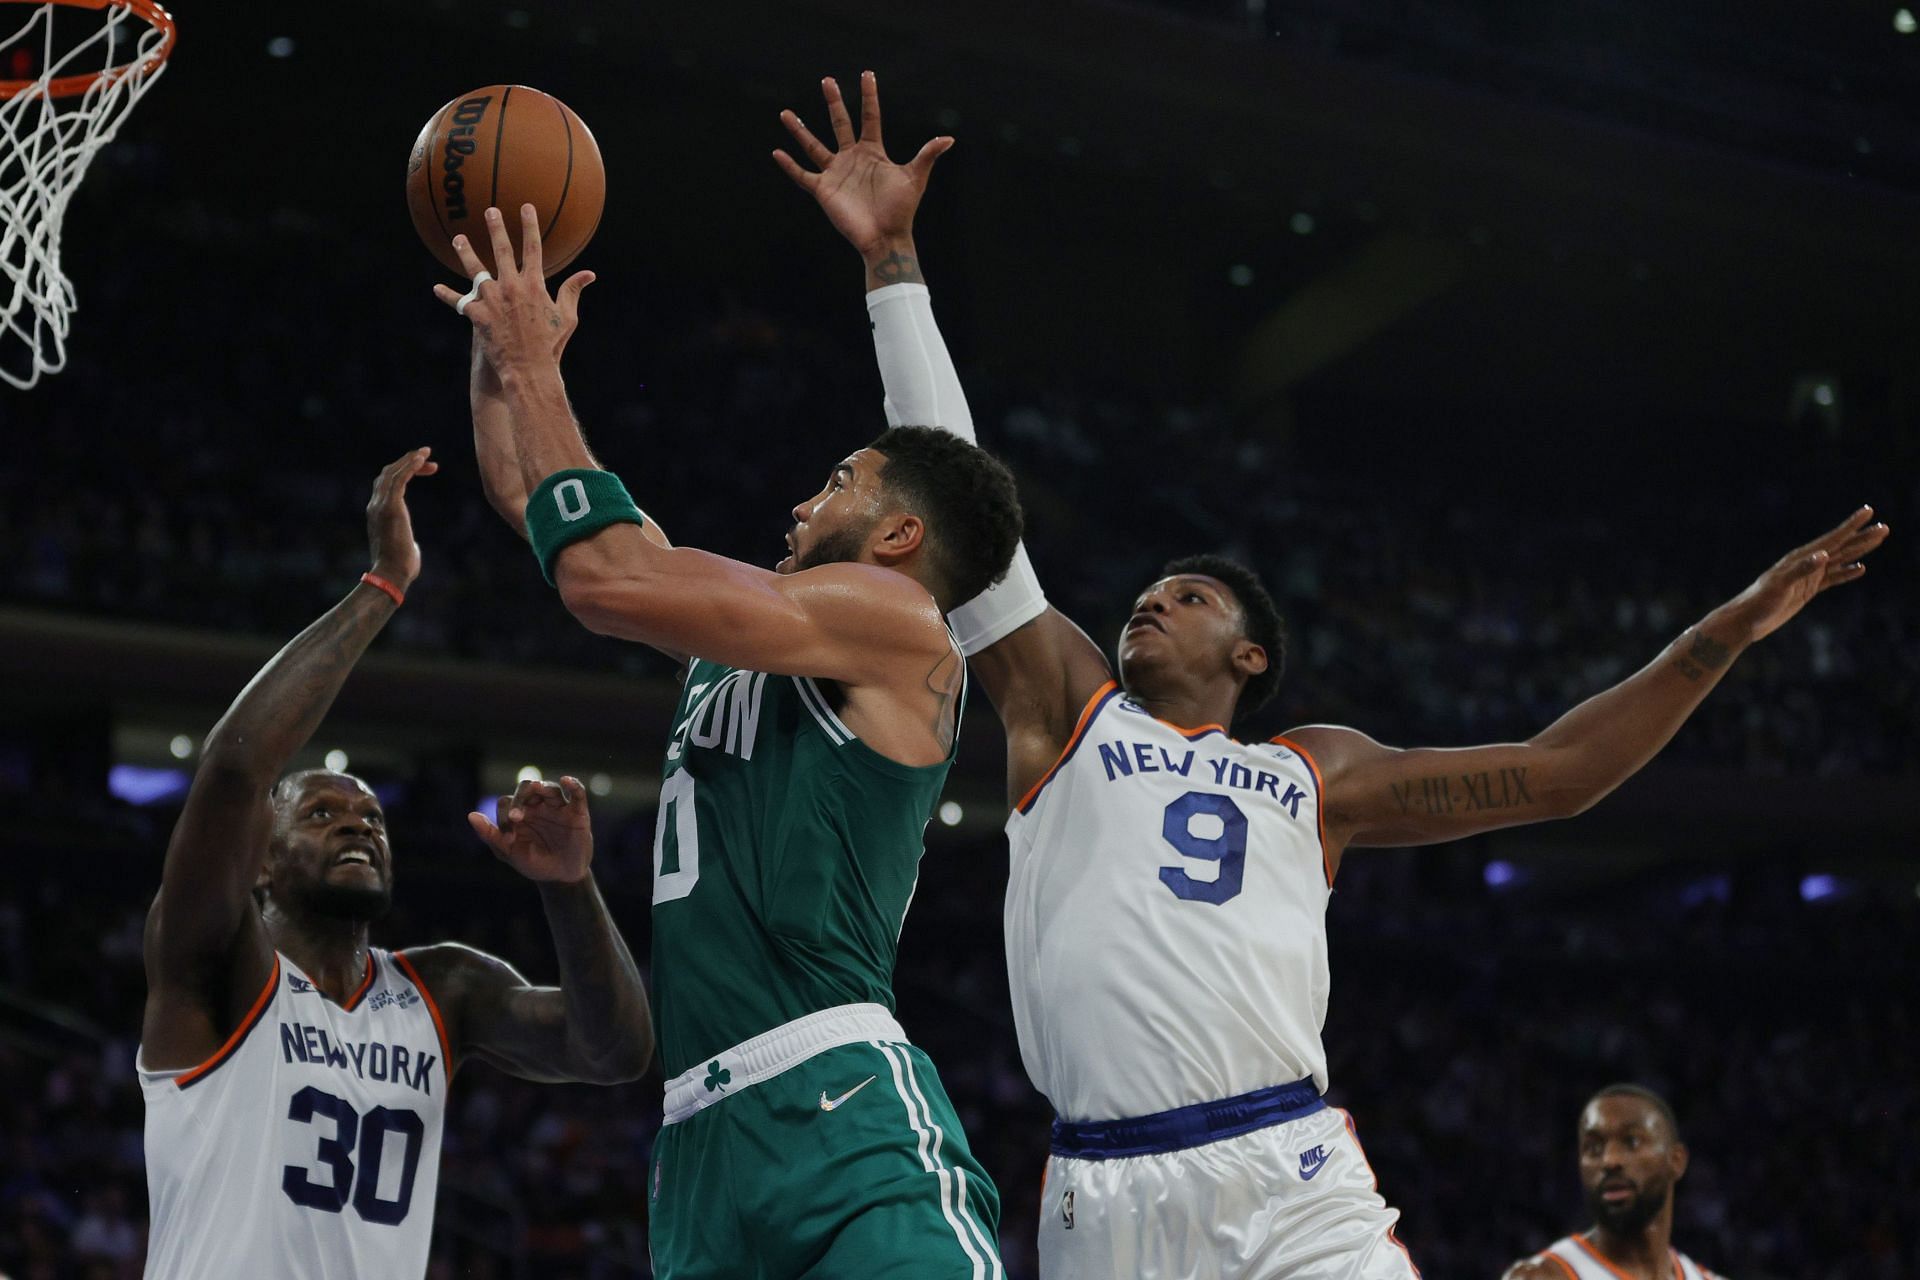 The Boston Celtics and the New York Knicks put on a show in their season opener at a raucous Madison Square Garden.